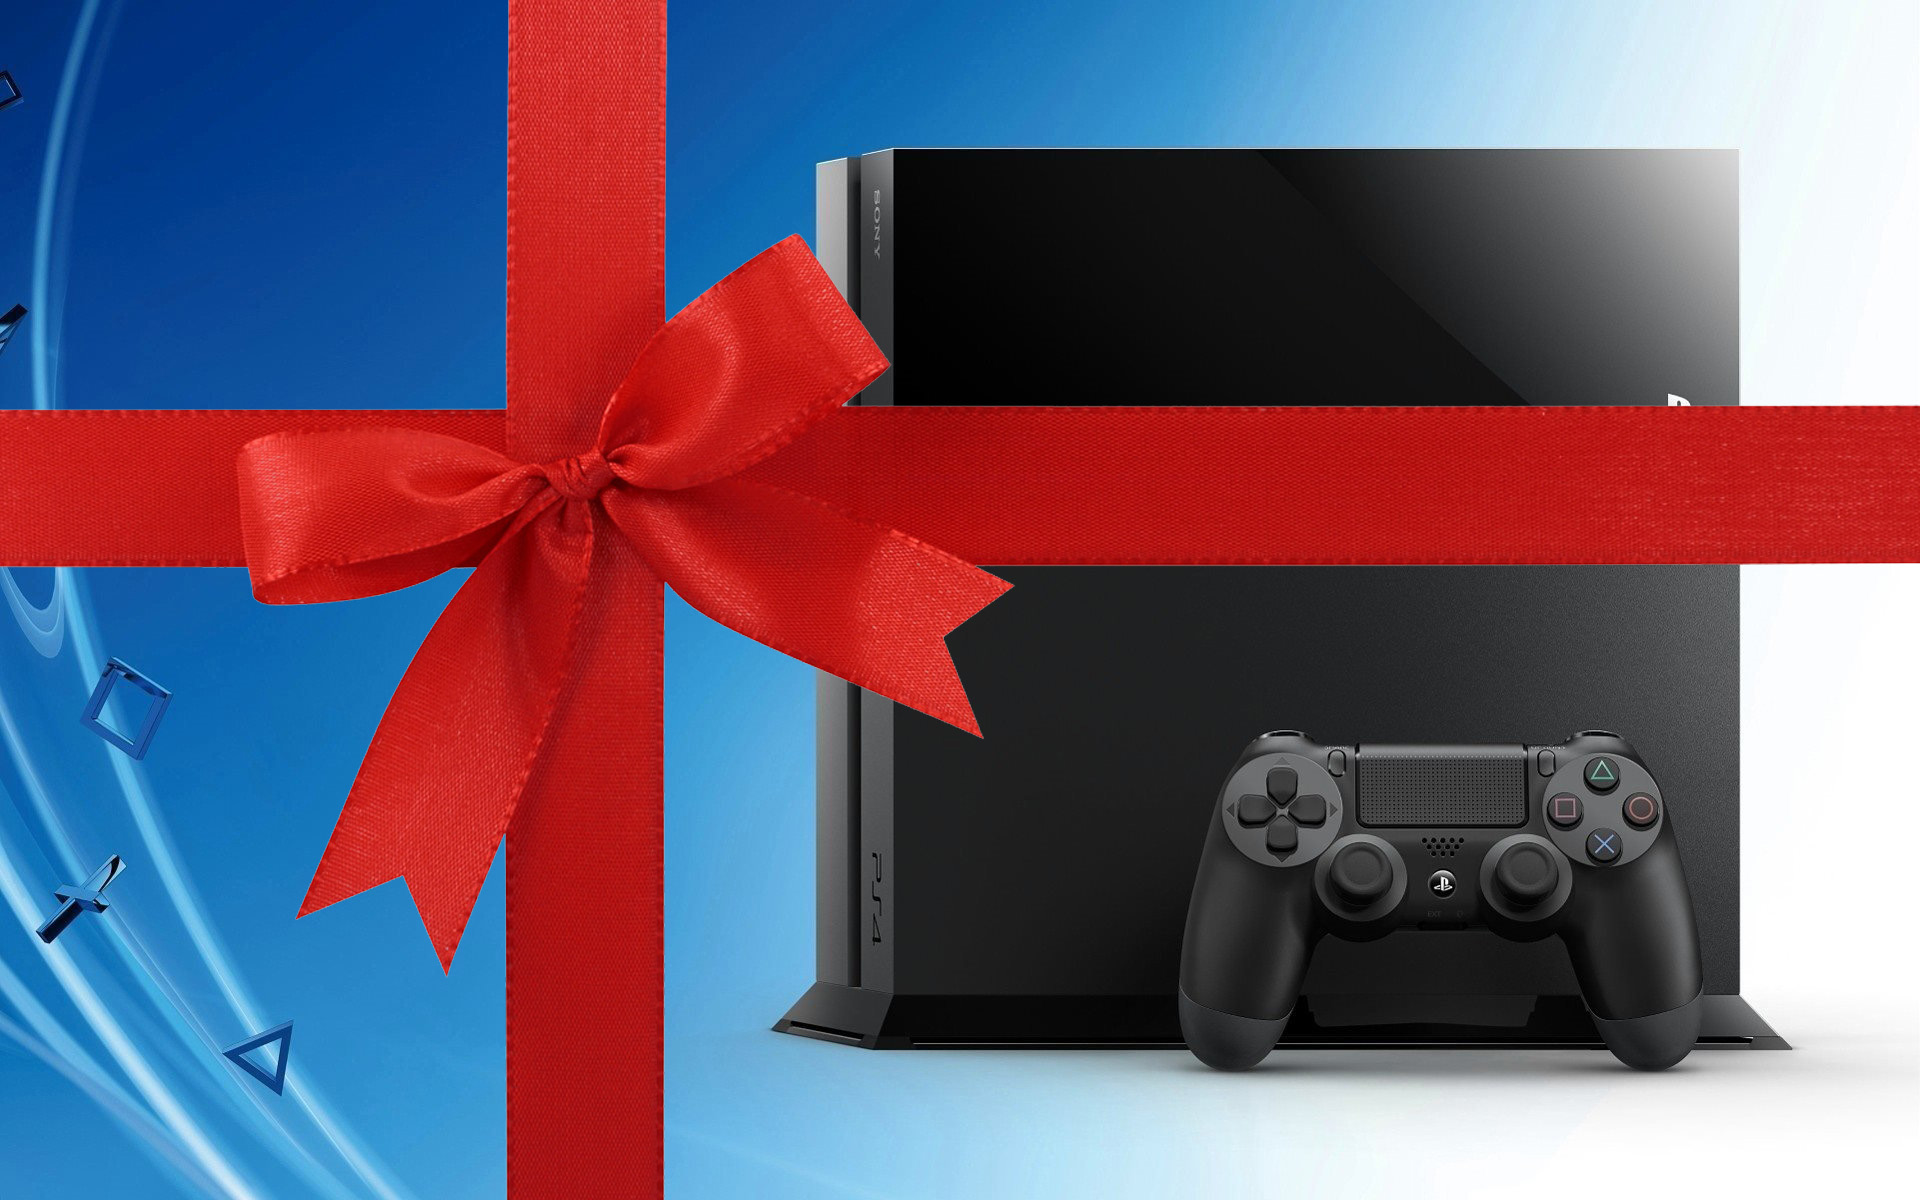 PS4 Christmas Buyer's Guide - The 